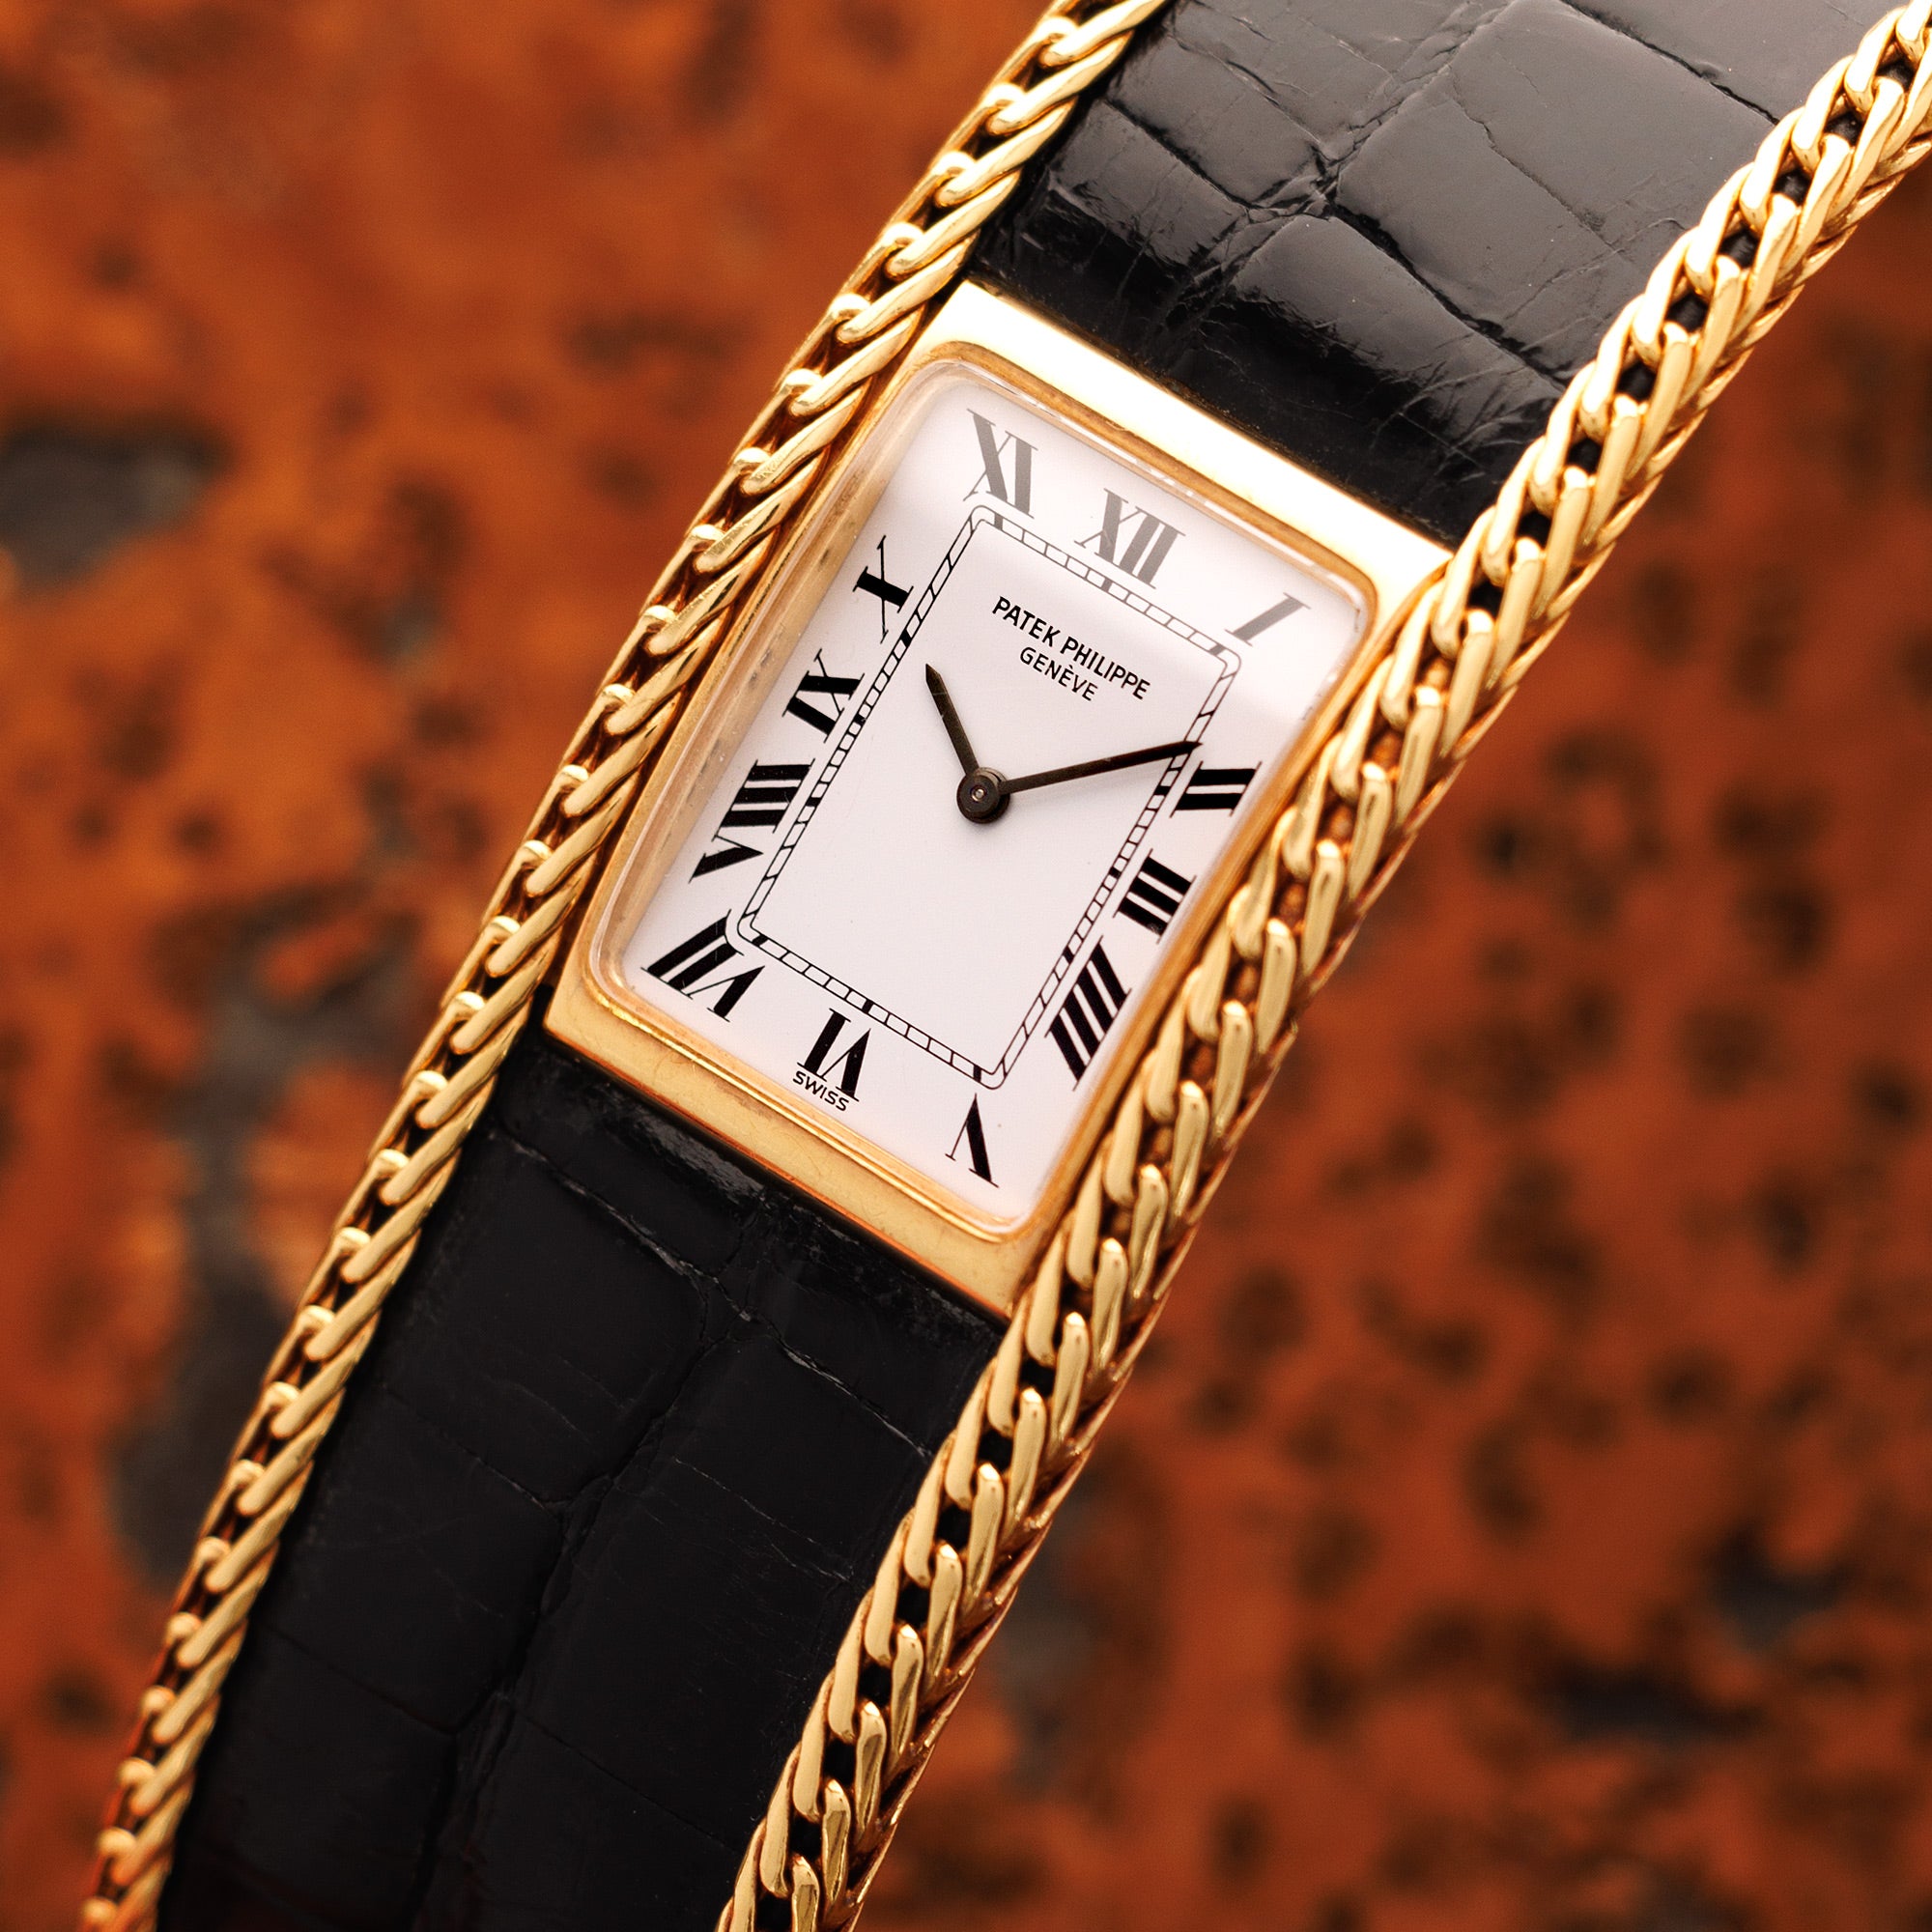 Patek Philippe - Patek Philippe Yellow Gold and Leather Bracelet Watch Ref. 4241 - The Keystone Watches